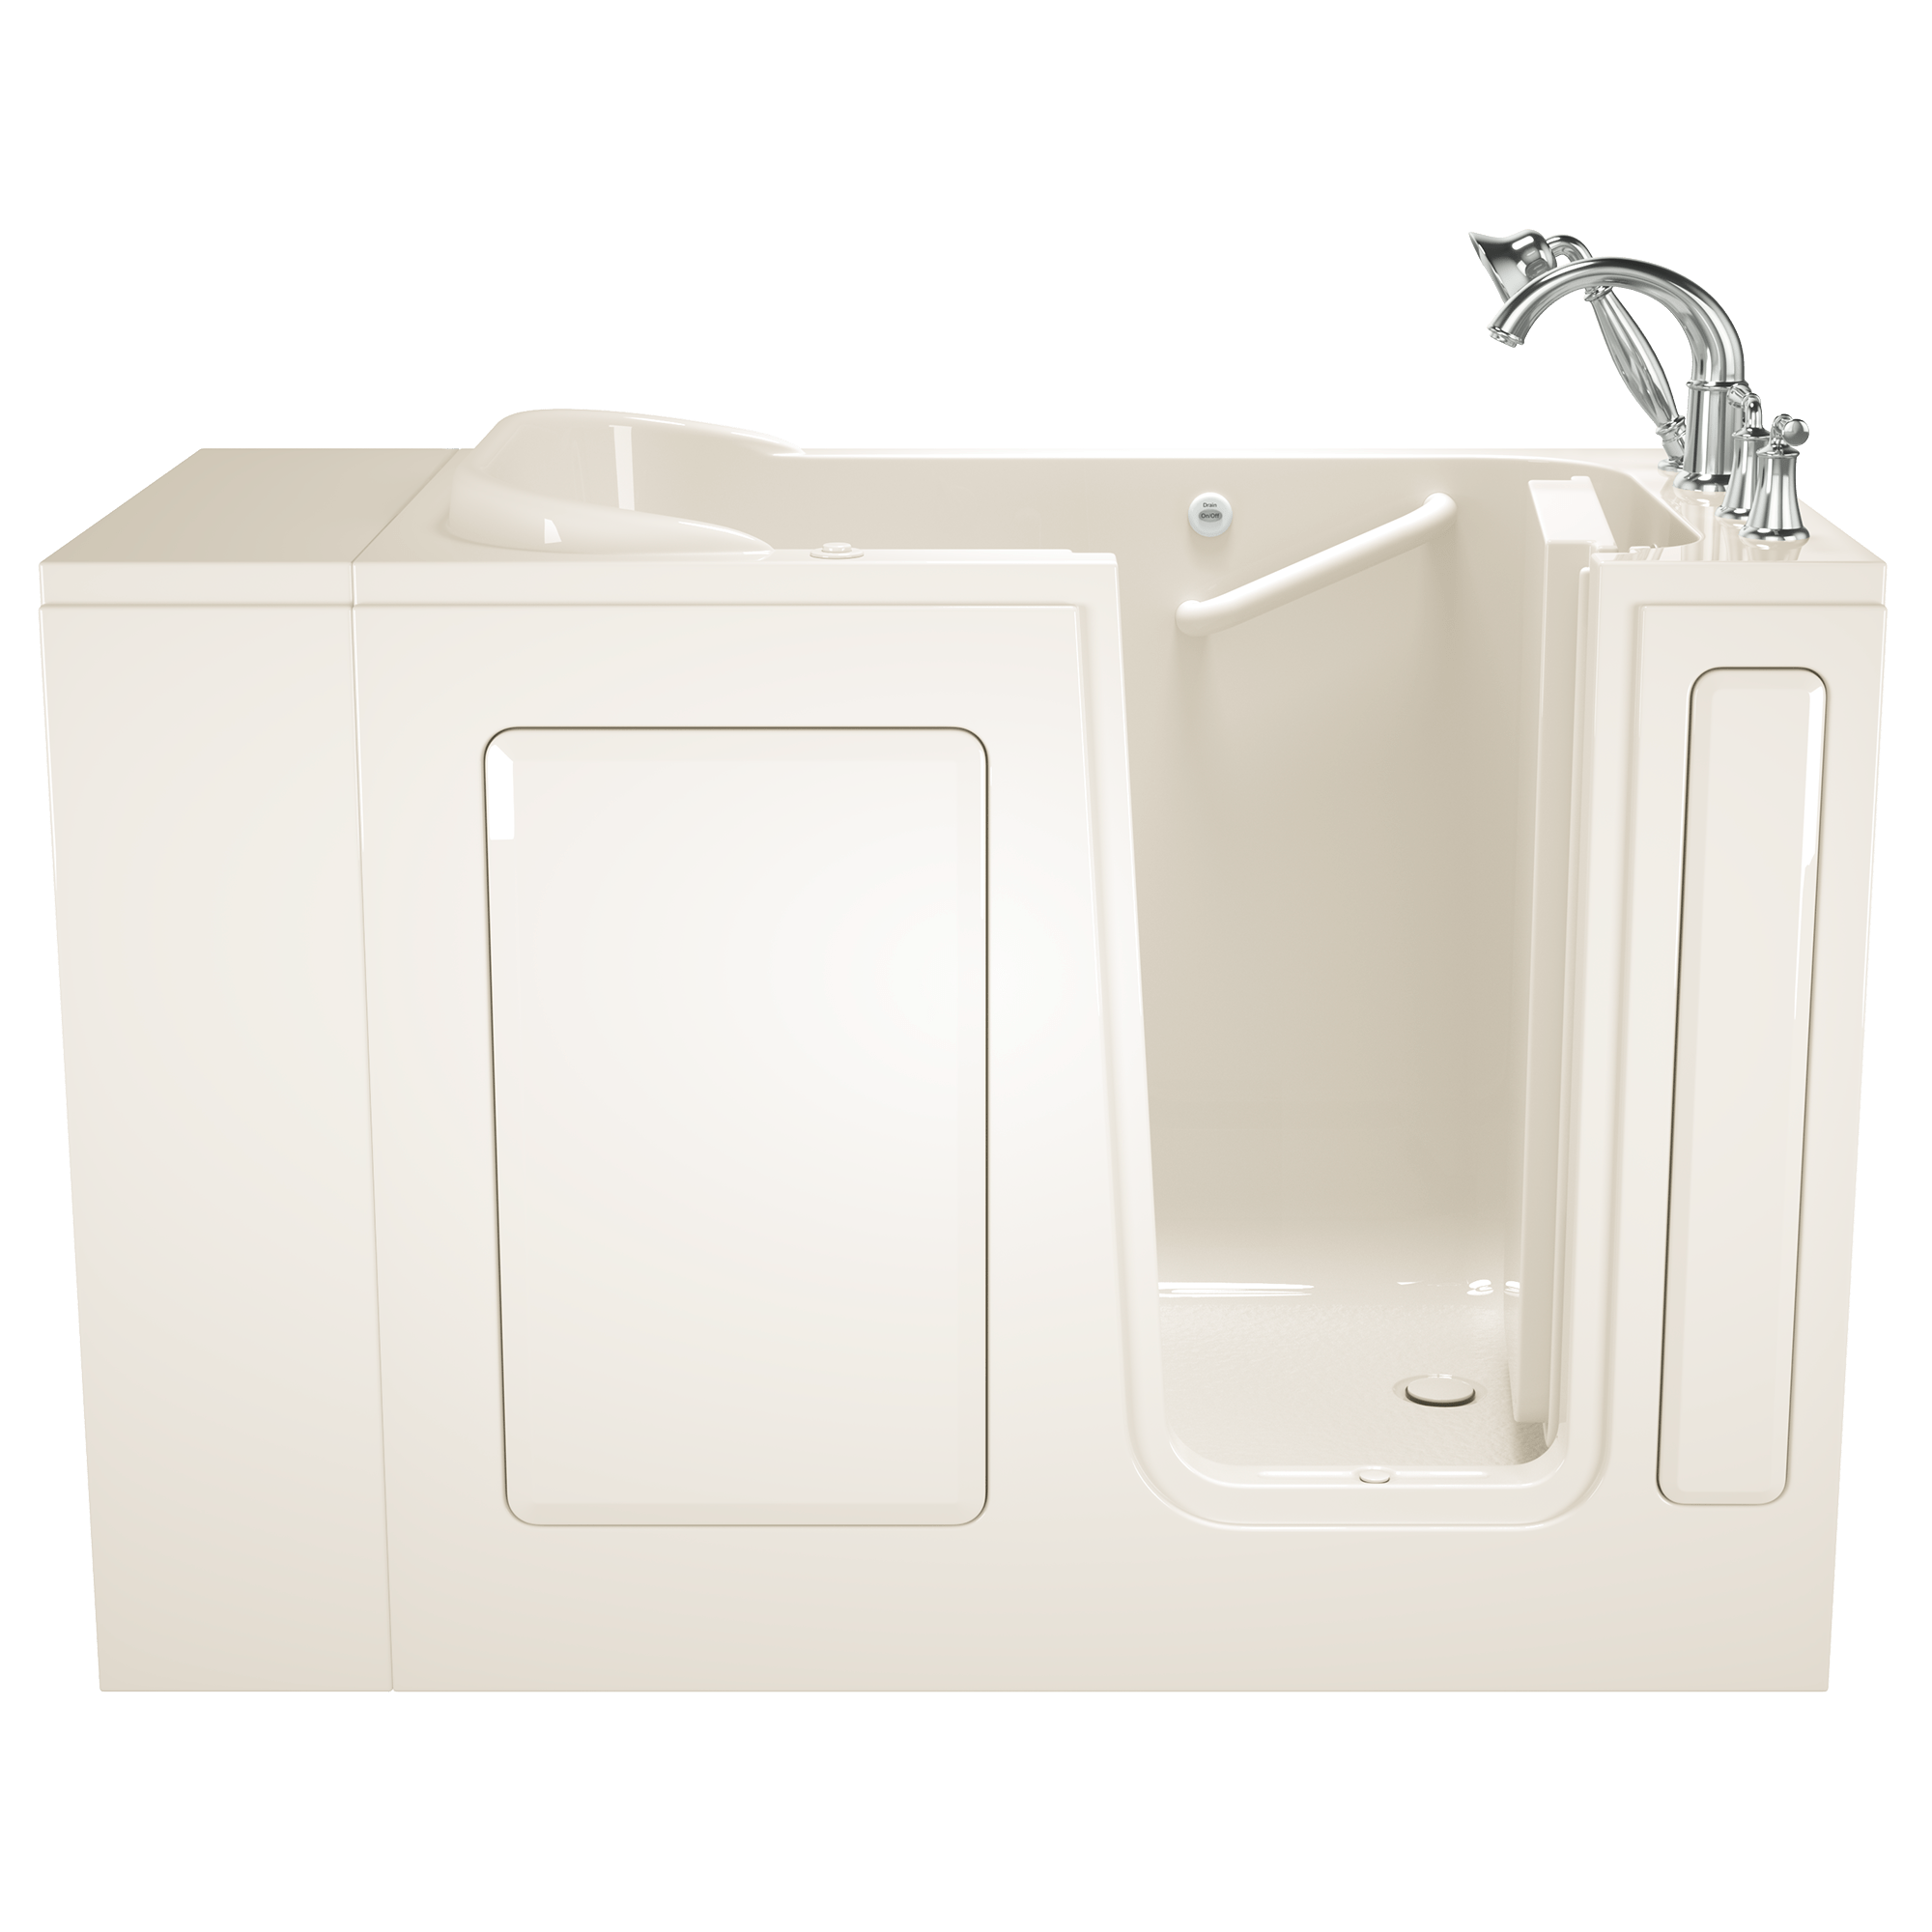 Gelcoat 28x48-inch Walk-in Bathtub with Air Spa System  Right Hand Door and Drain